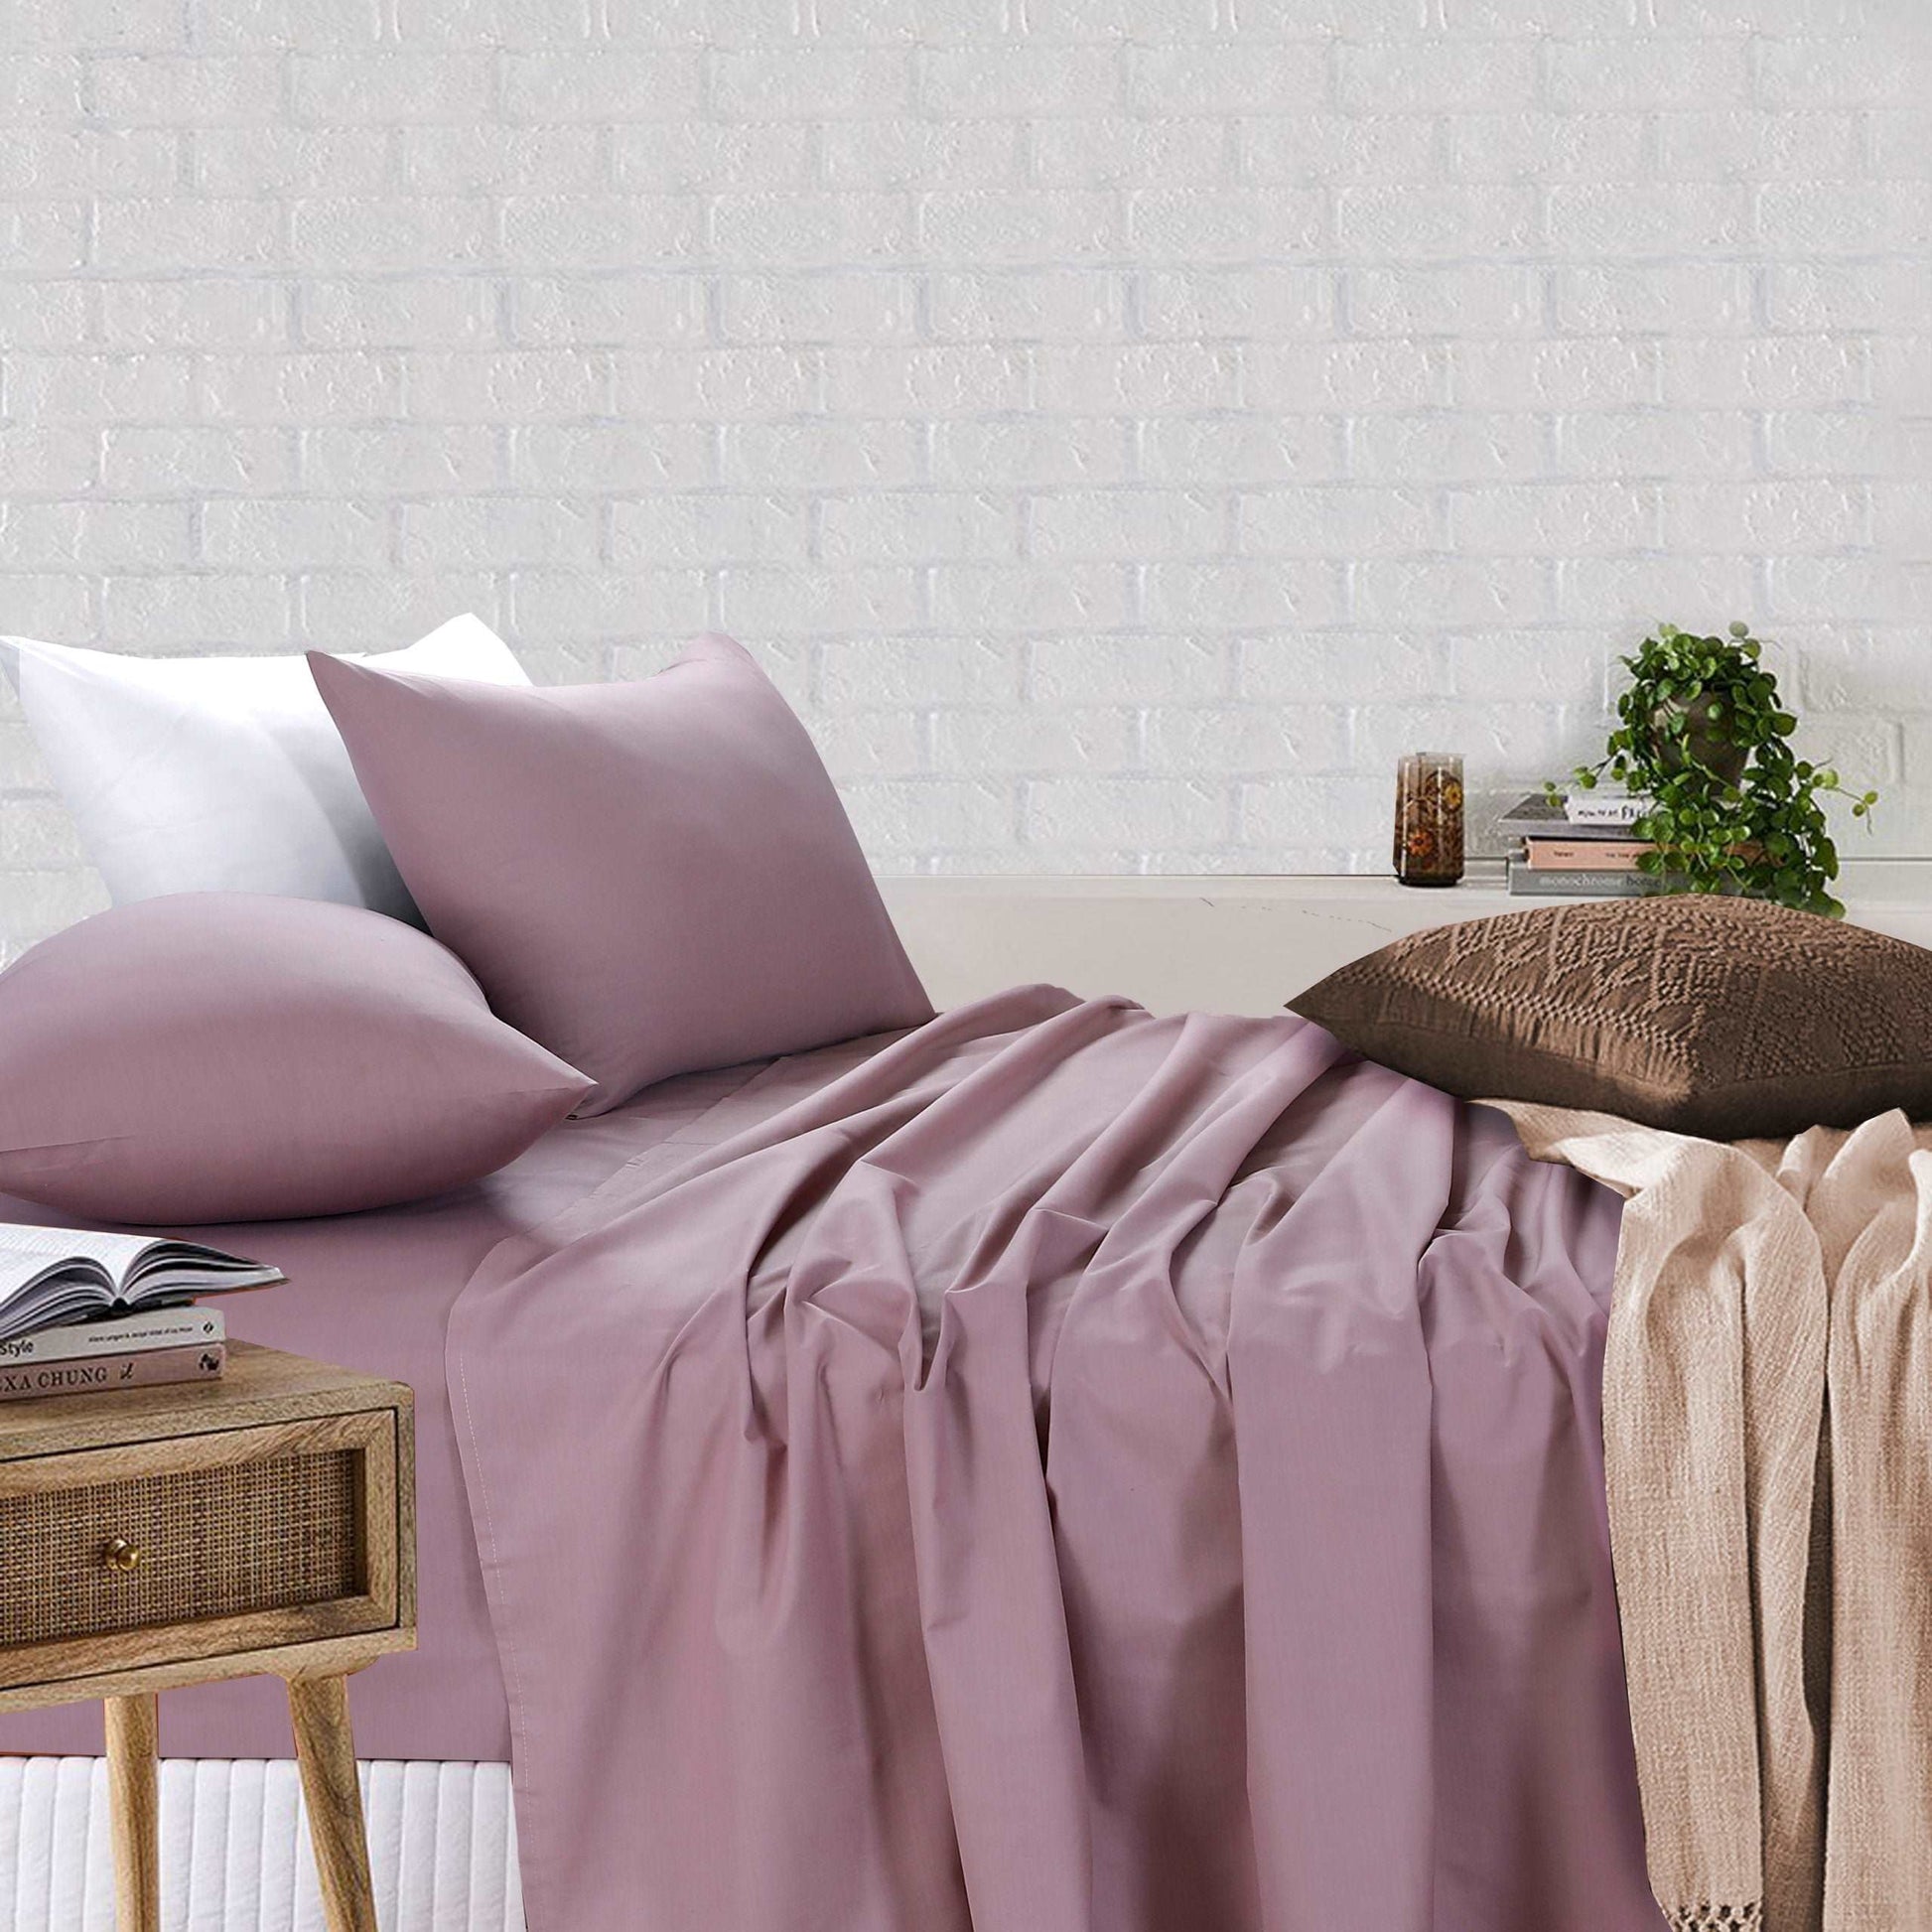 Dusky Pink Bedsheets Set- Flat And Fitted Sheets With Pillowcases